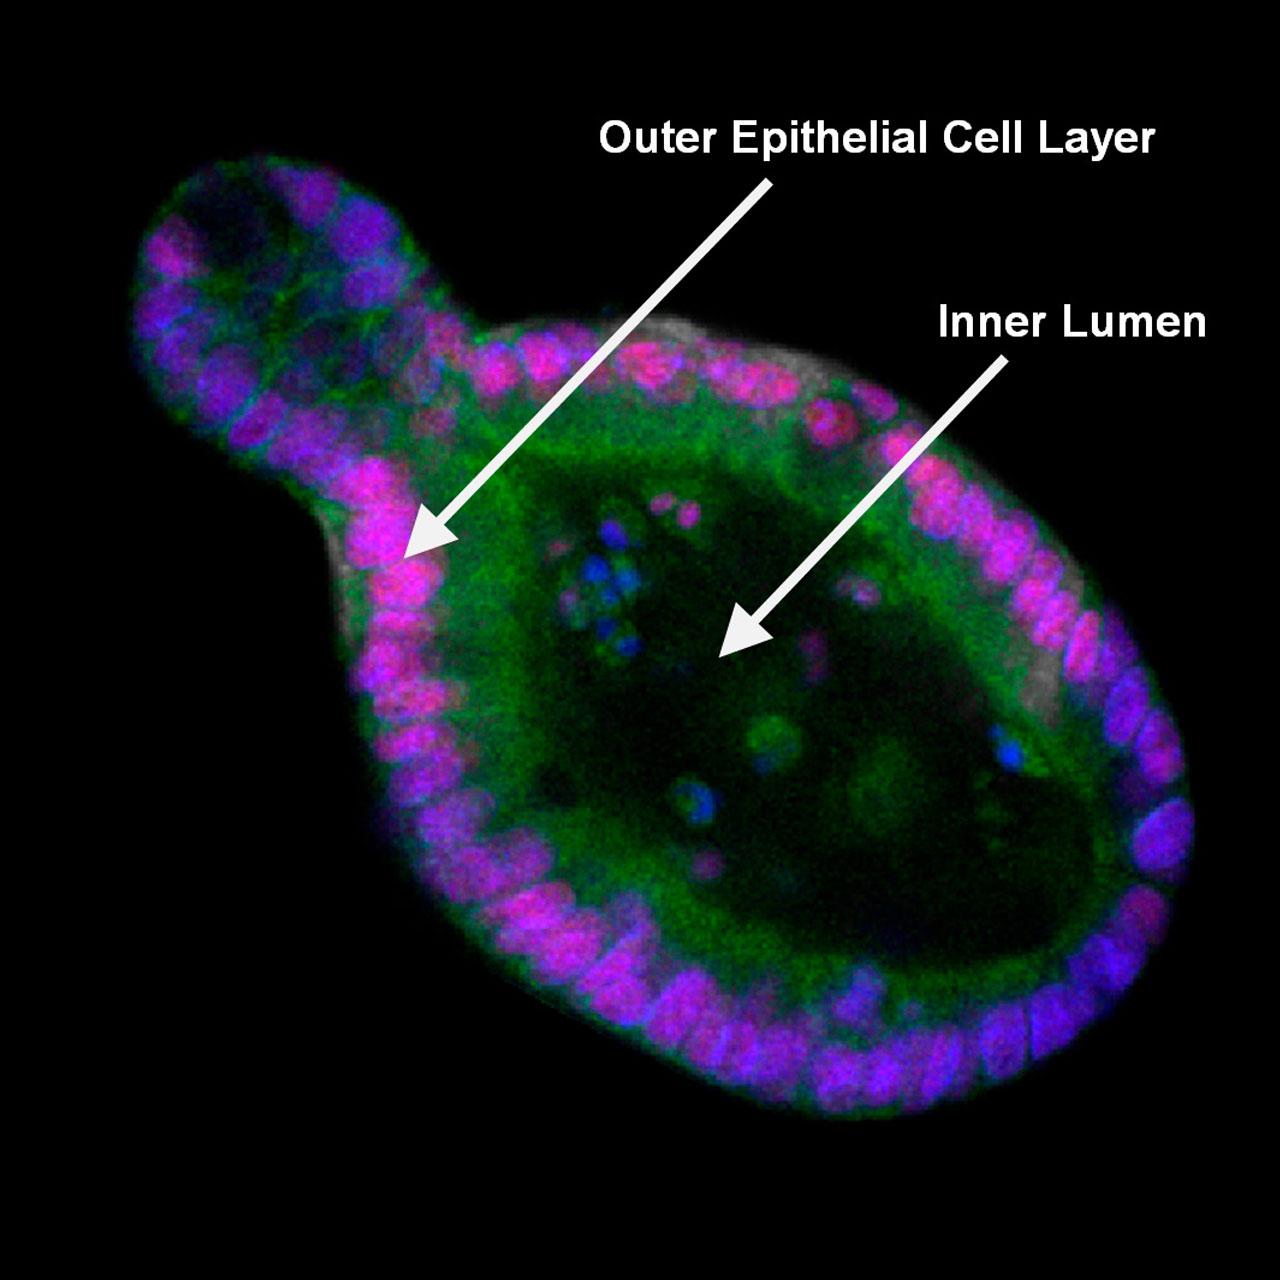 Figure 1A: Basic morphology of an intestinal organoid. For clarity, a central cross section of a complete 3D organoid image set is shown.